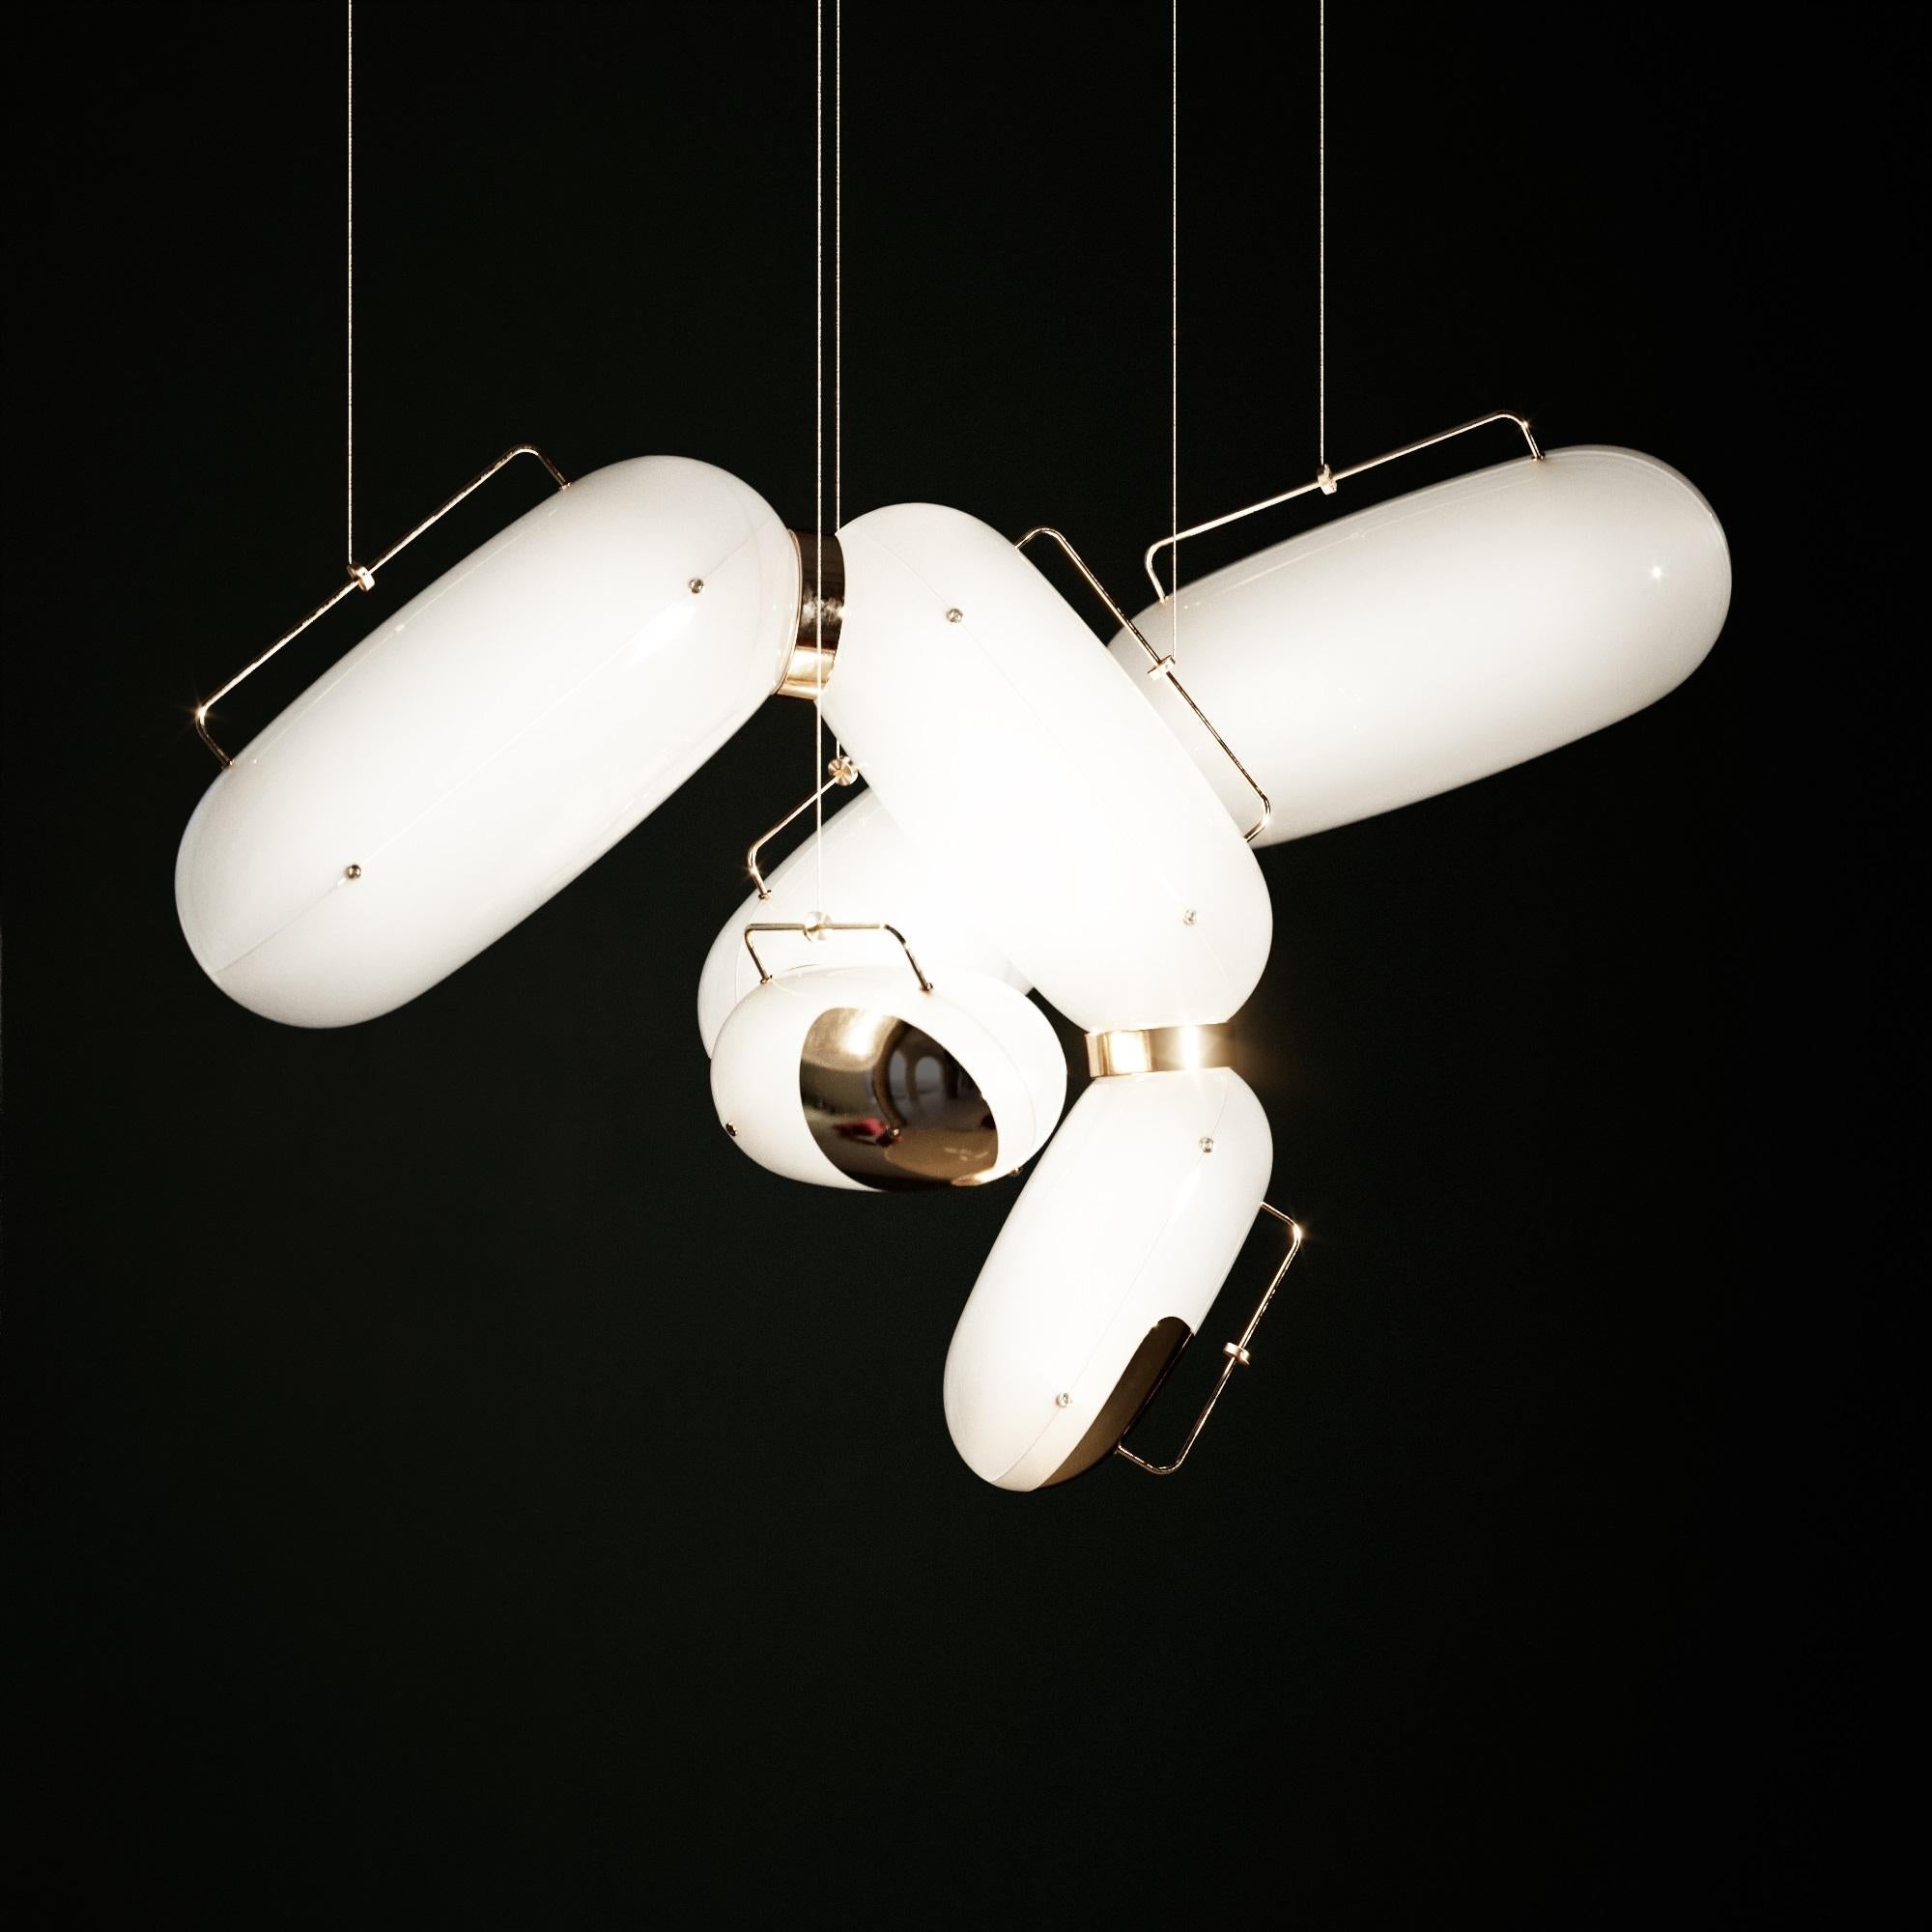 Put Up Put Up Pendant Lamp by Taras Yoom
Limited Edition of 5
Dimensions: D 80 x H 160 cm cm
Materials: Acrylic, brass.

The luminaire consists of matte acrylic parts (phalanges) with brass clasps, with adjustable suspensions to create compositions.